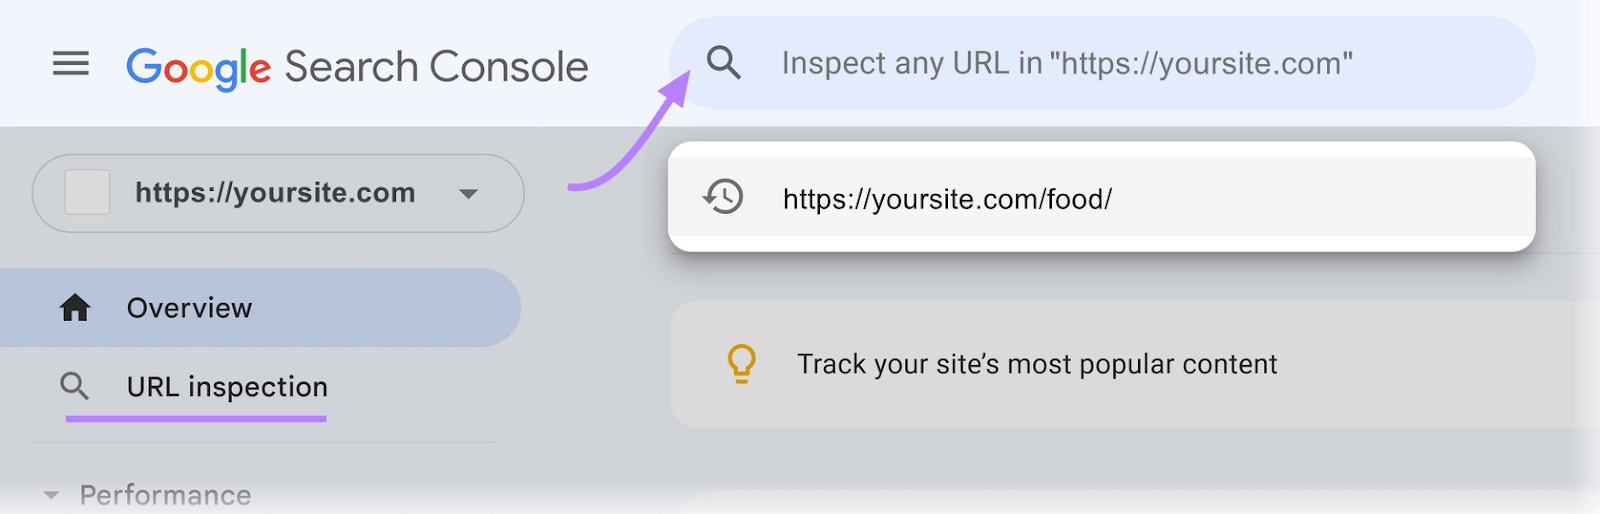 inspect any URL in Google Search Console